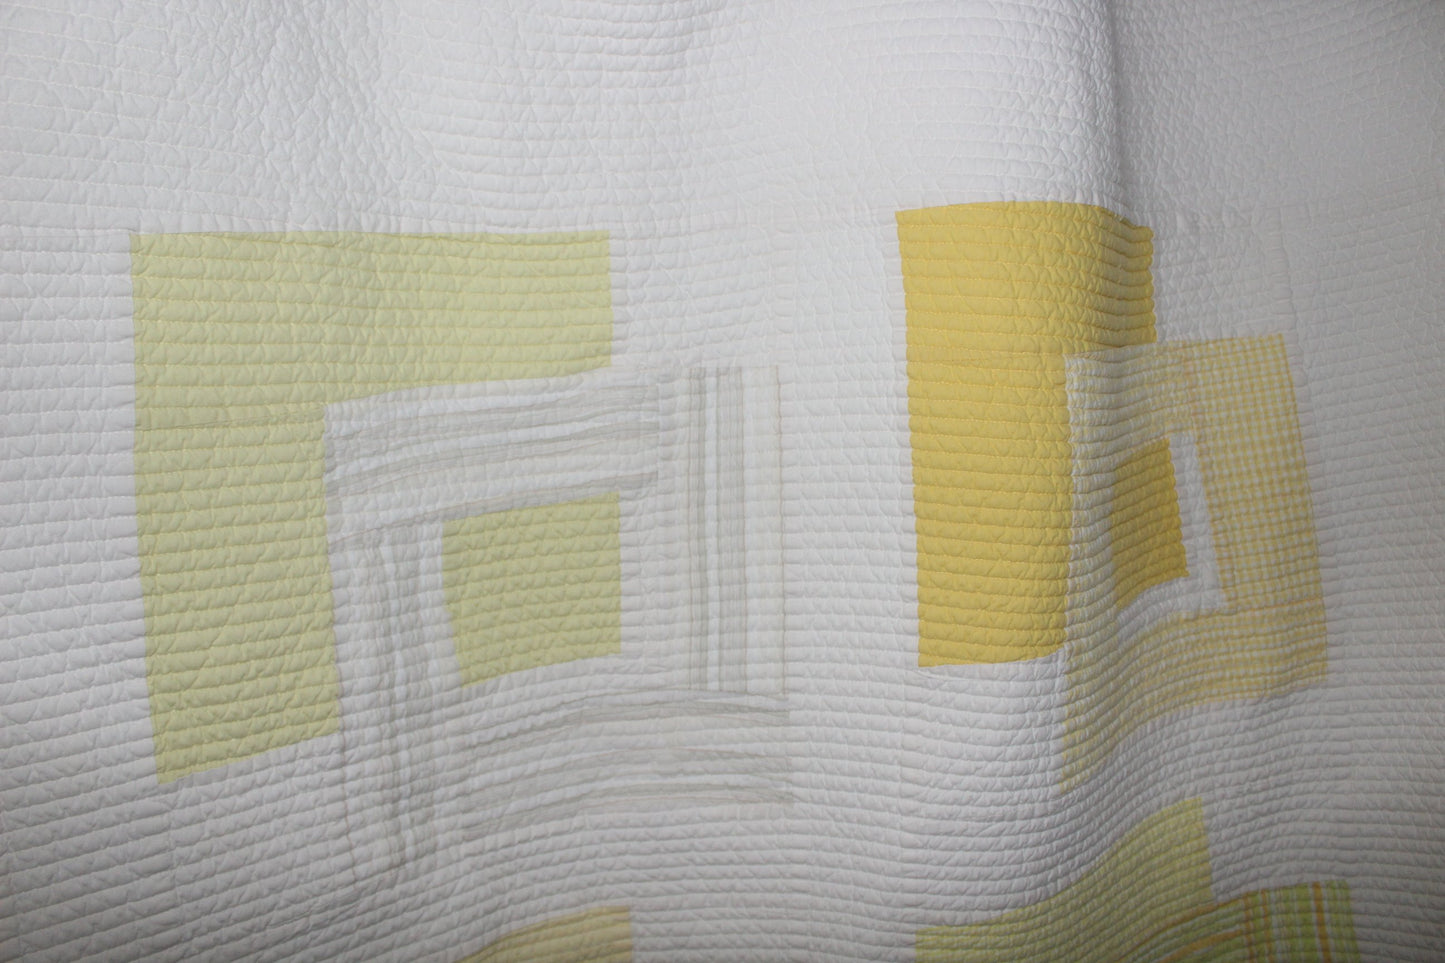 Crate Barrel Quilt King 104" X 94" Edgebrook All Cotton Geometric Mod Yellows Greens White linear quilting